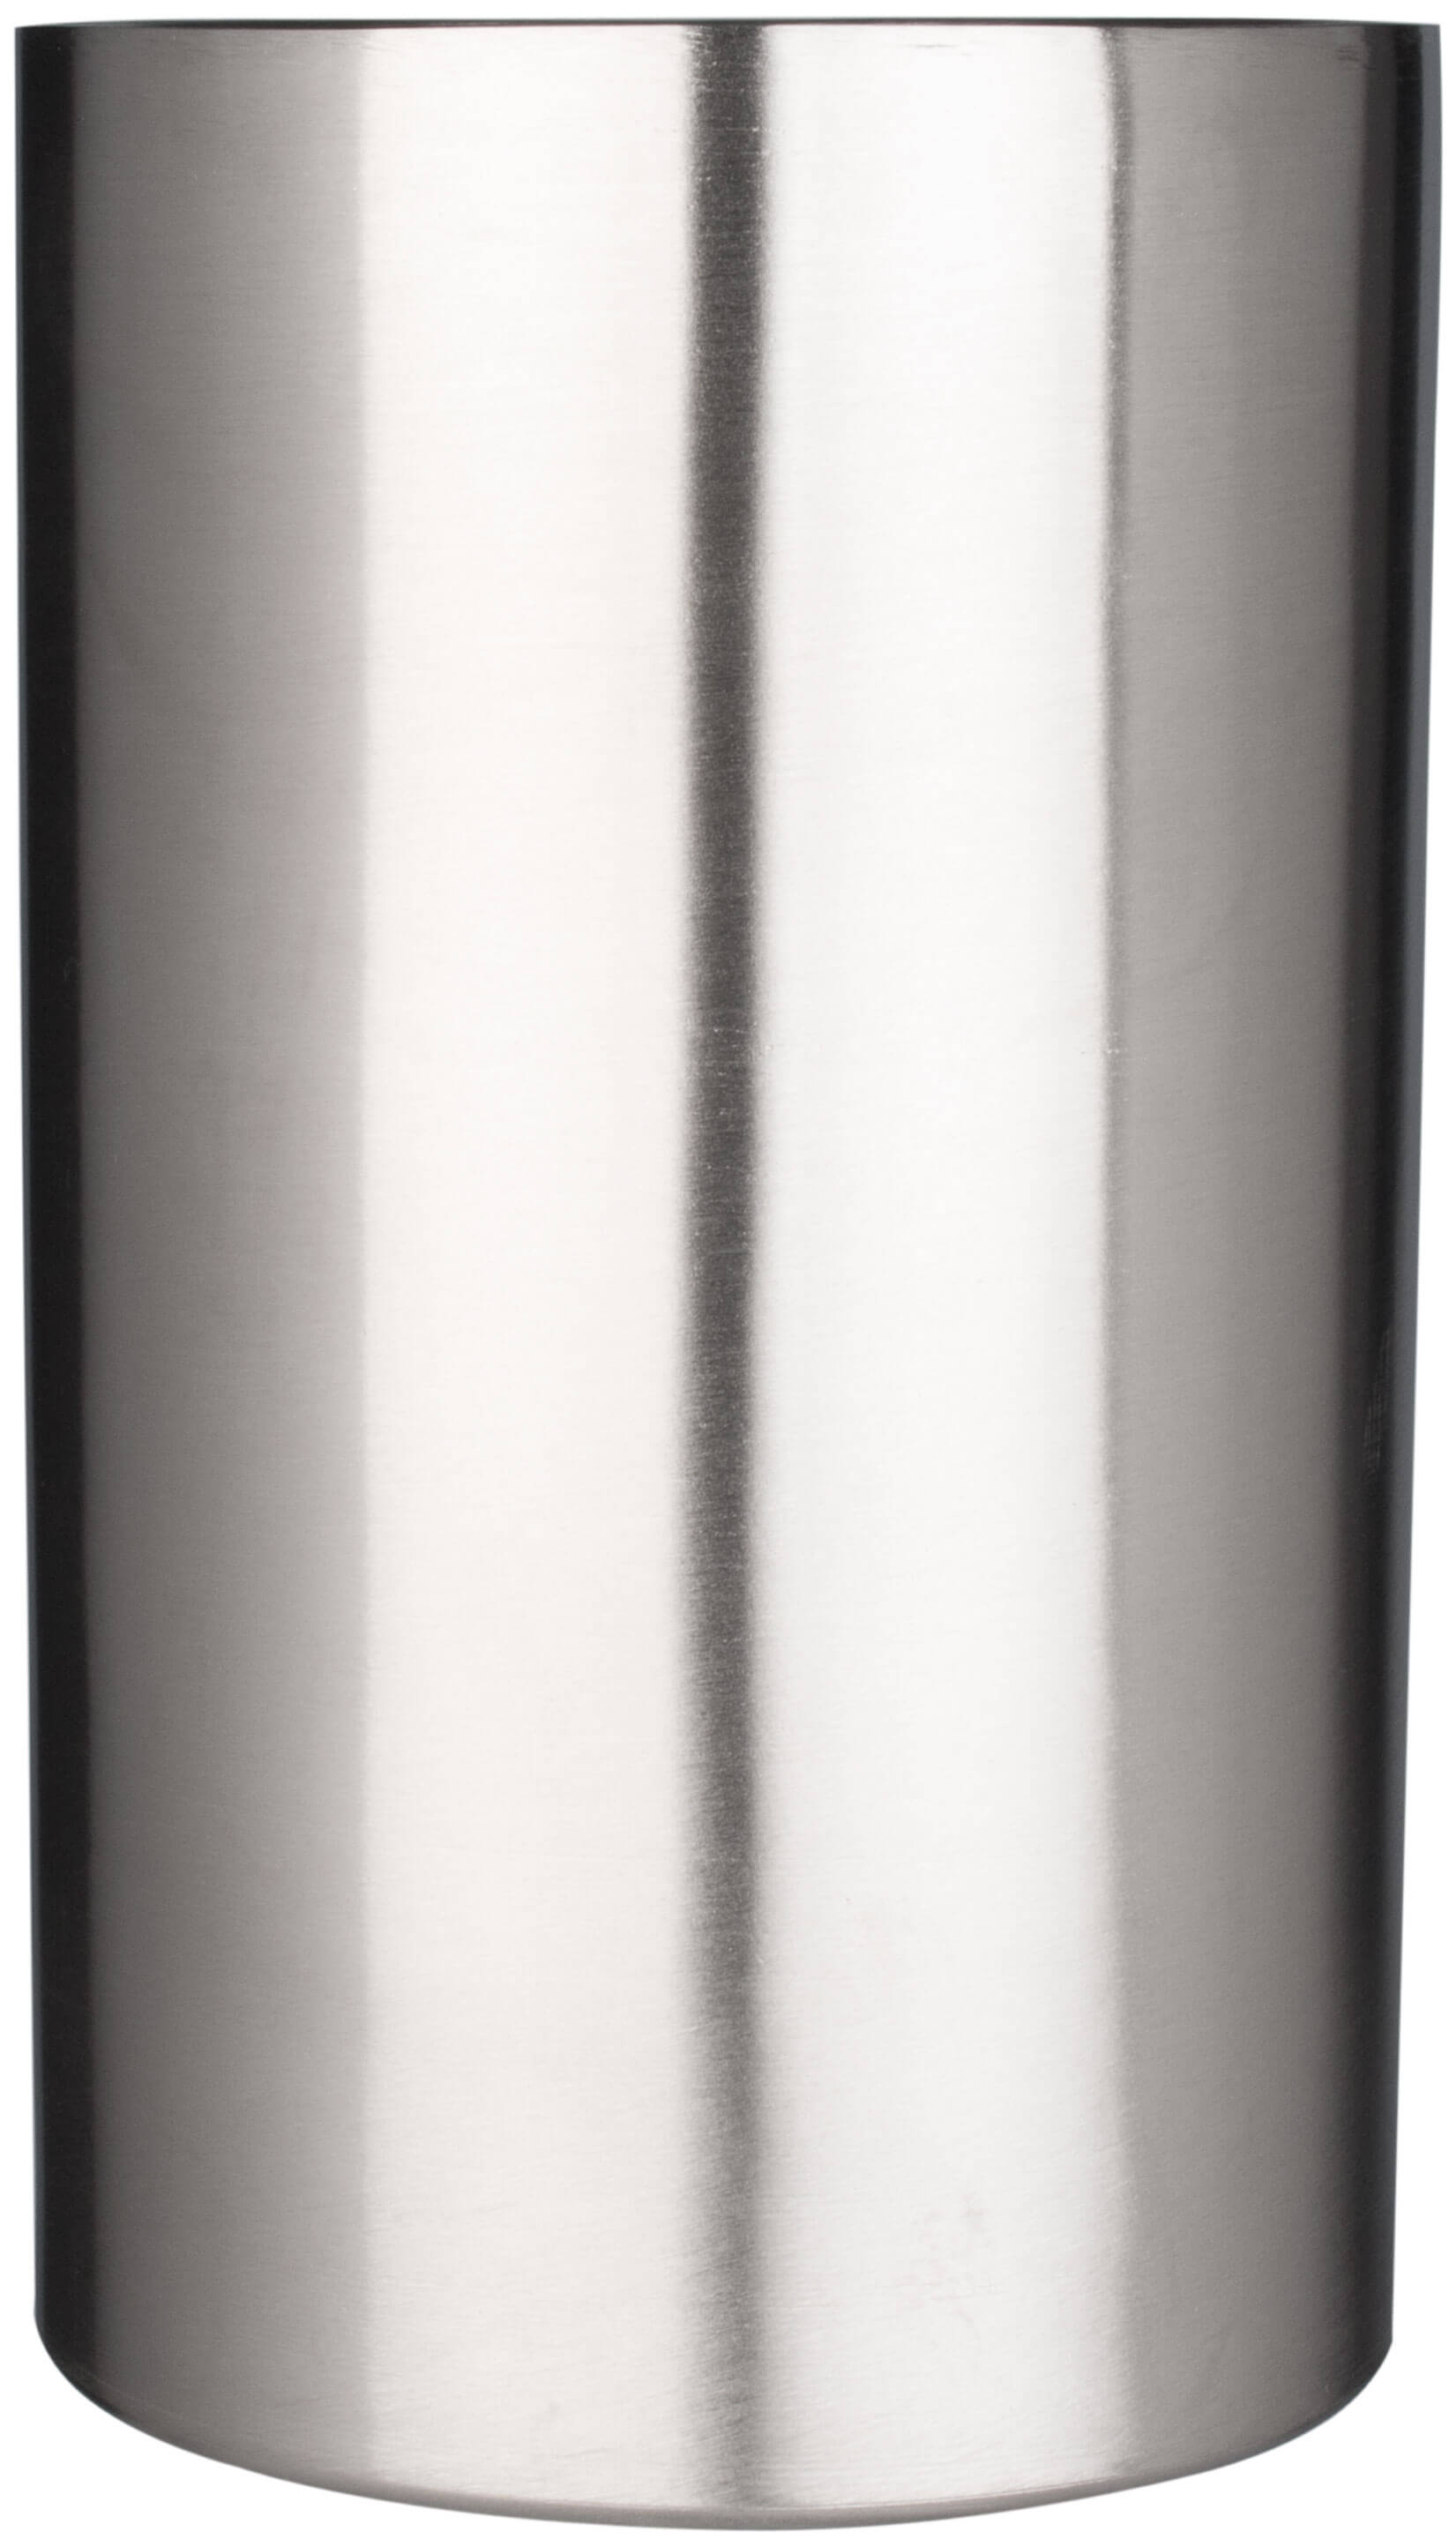 Thermo bottle cooler, stainless steel - 12cm